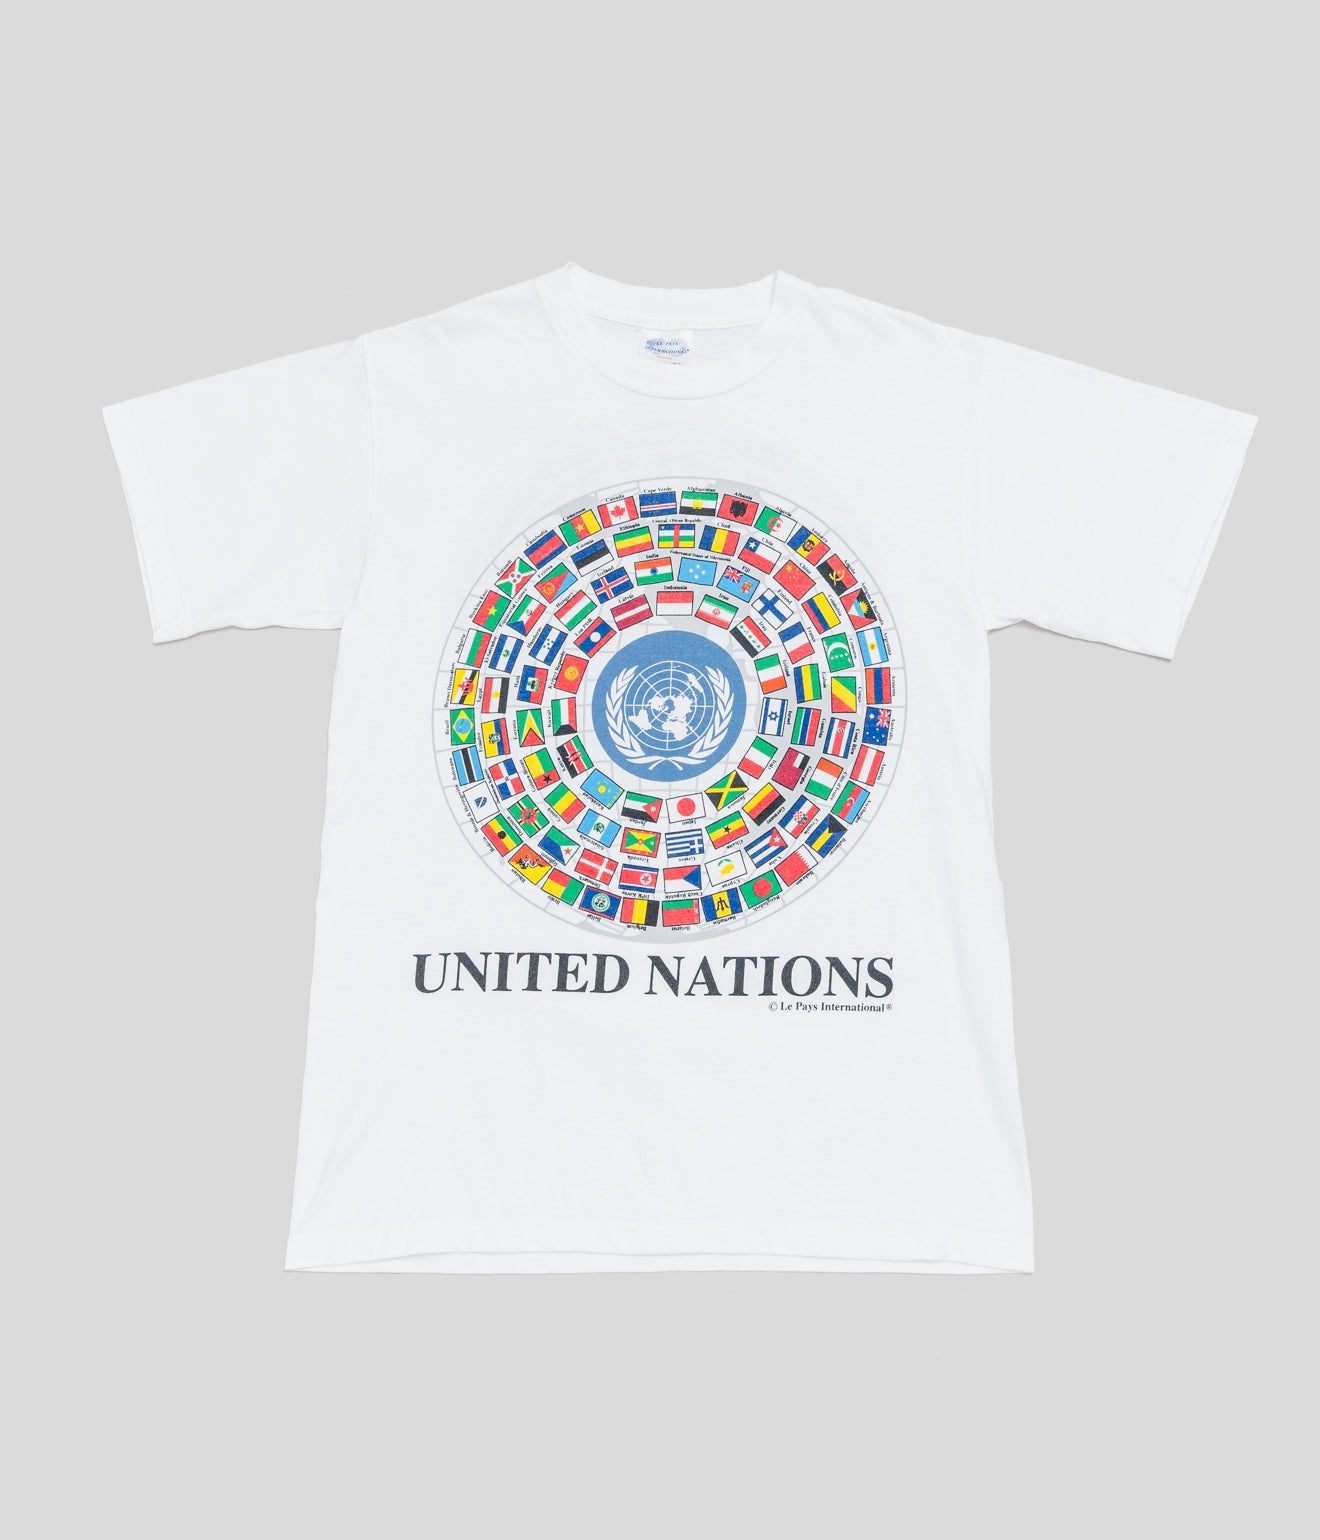 90’S LE PAYS INTERNATIONAL PRINTED T-SHIRT MADE IN USA - WEAREALLANIMALS